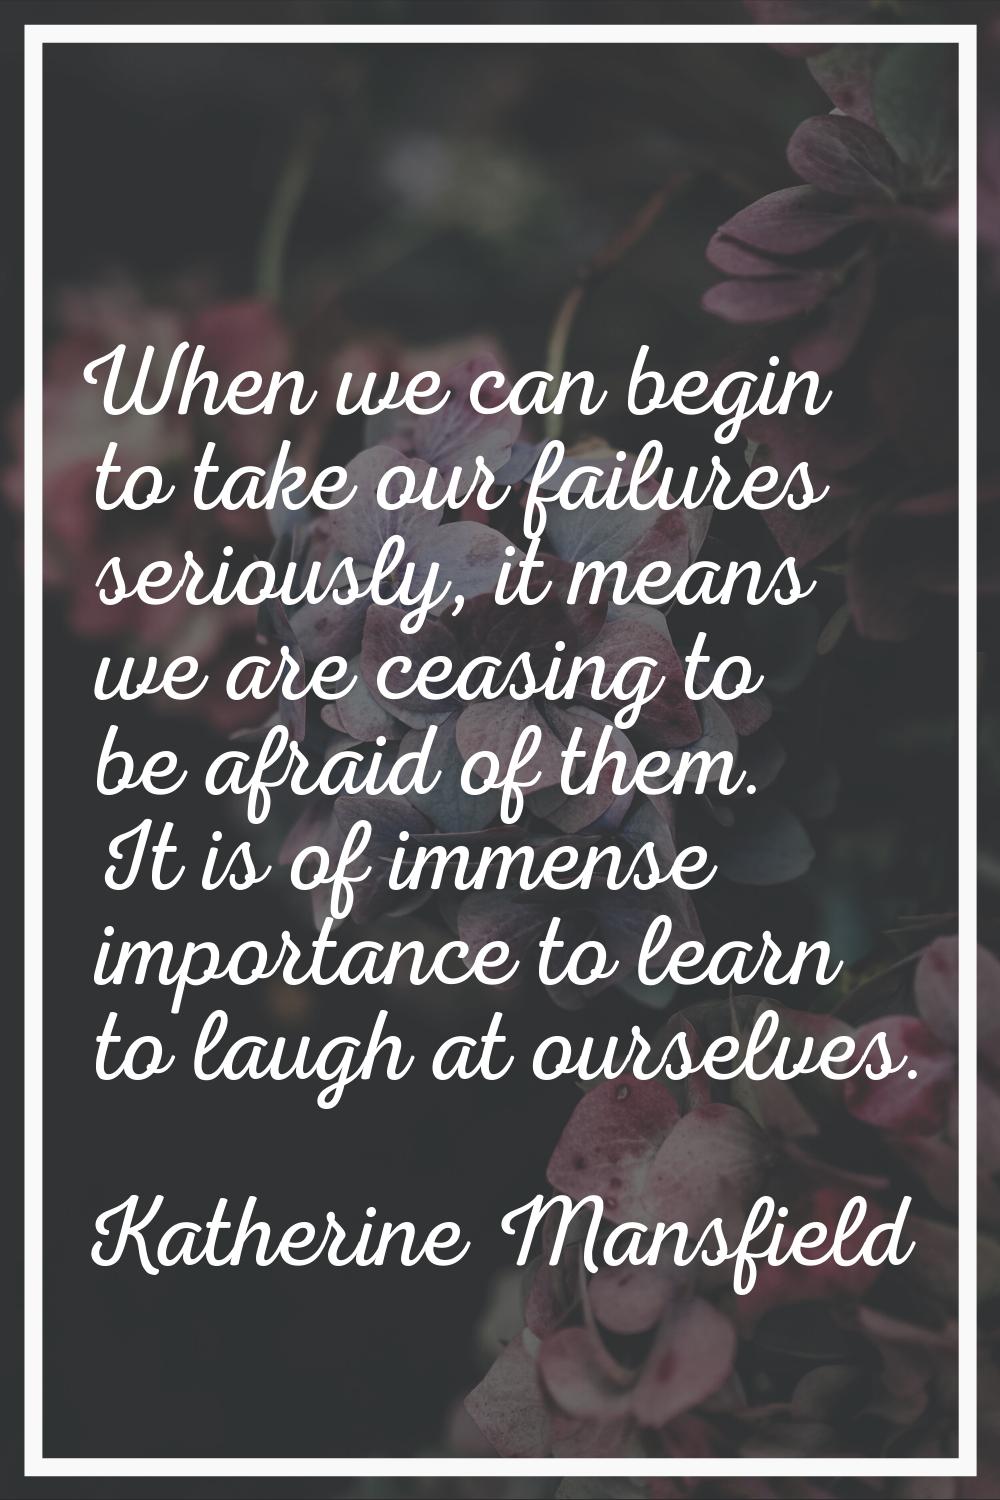 When we can begin to take our failures seriously, it means we are ceasing to be afraid of them. It 